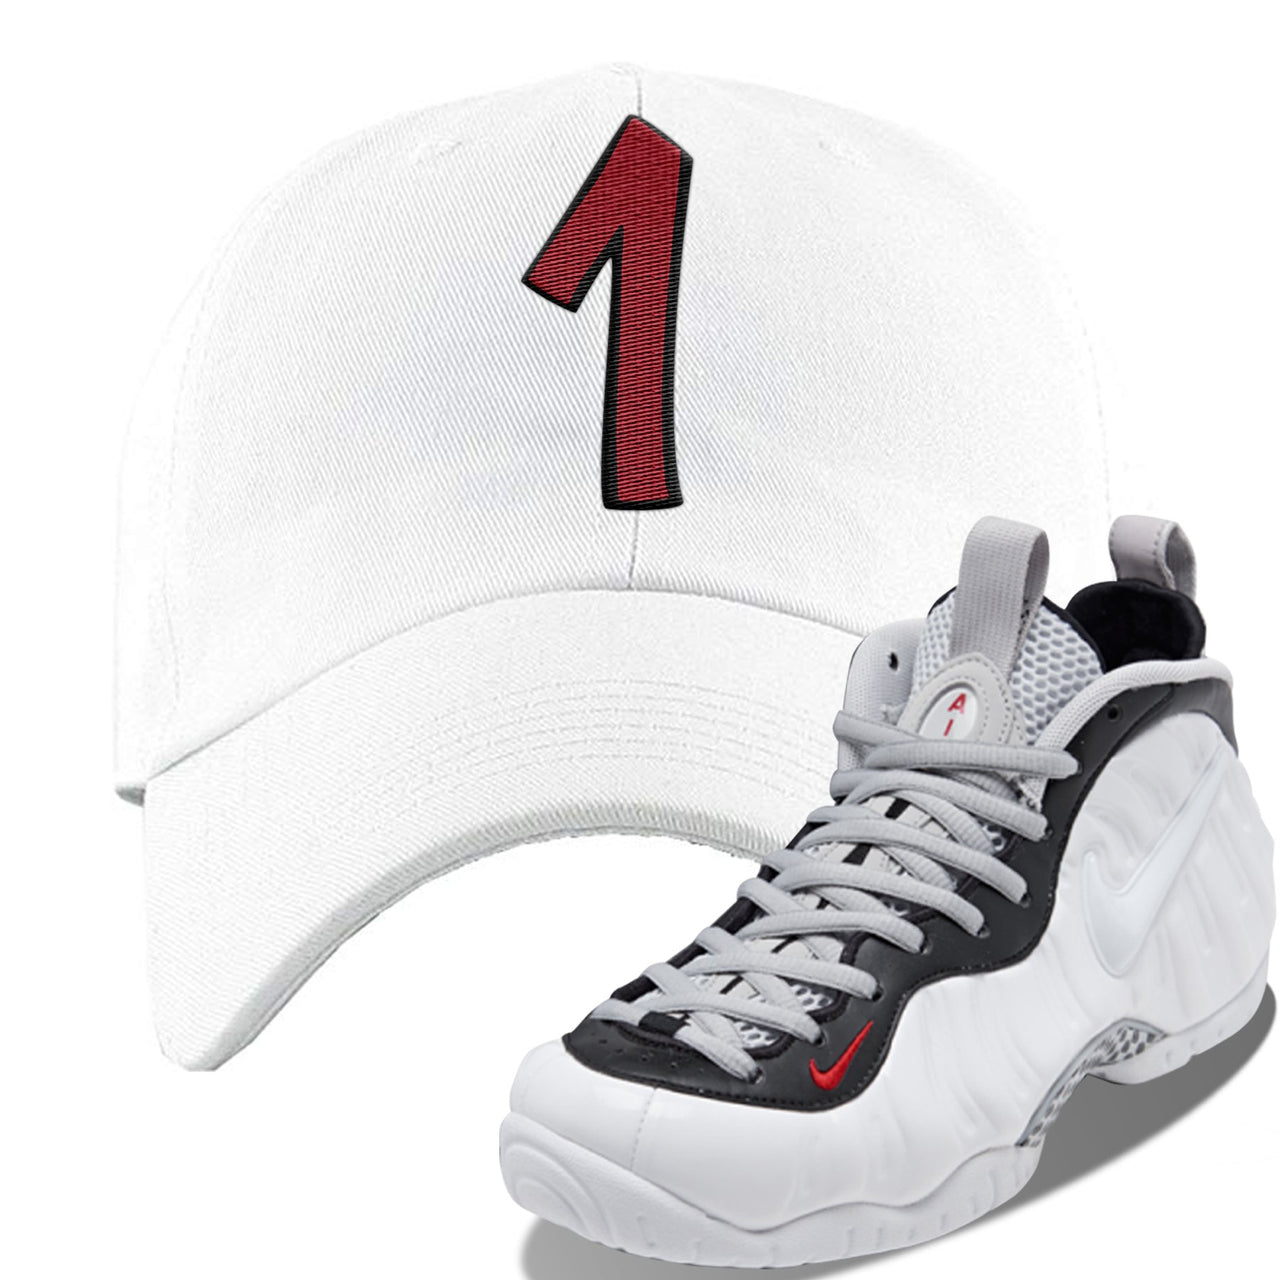 Foamposite Pro White Black University Red Sneaker White Dad Hat | Hat to match Nike Air Foamposite Pro White Black University Red Shoes | Penny One